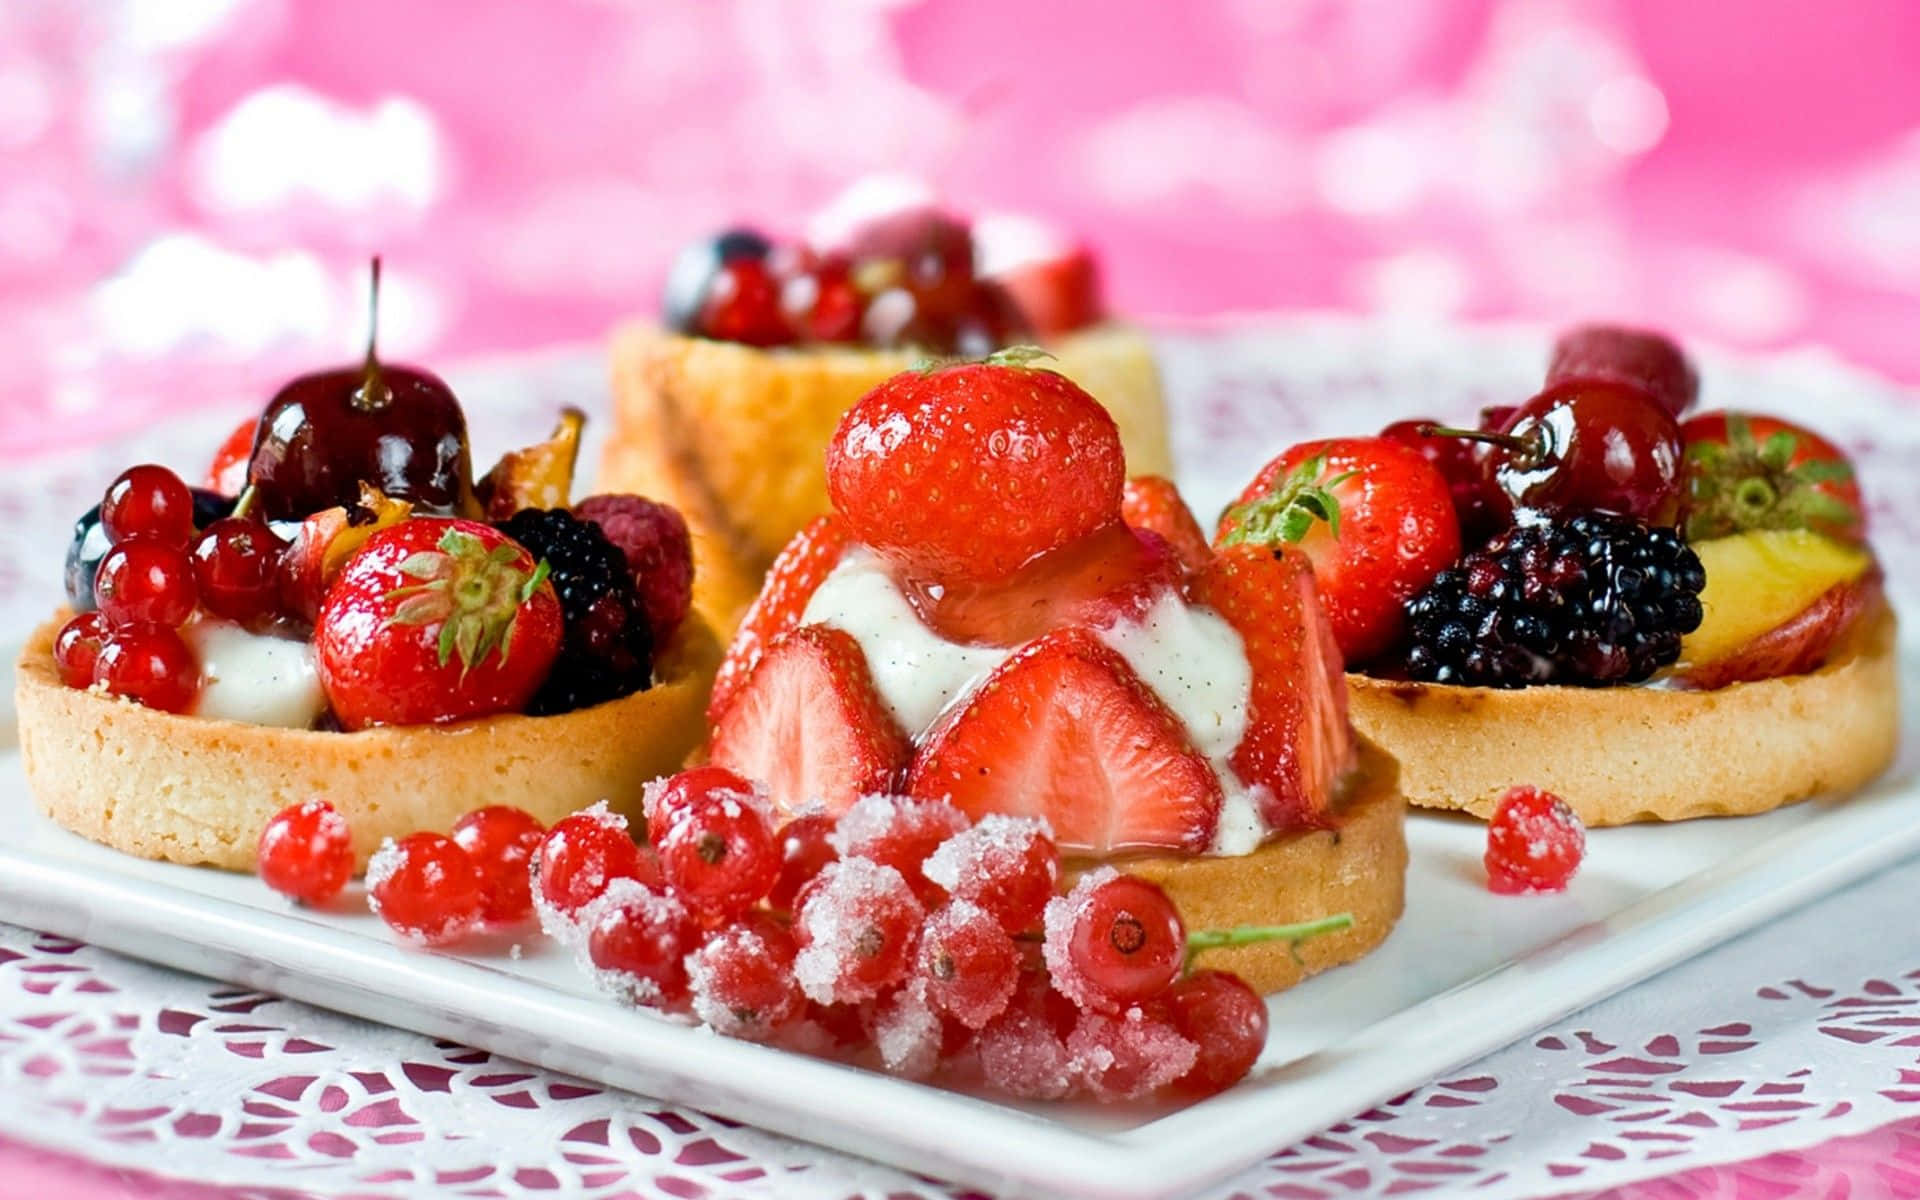 Indulge in delicious pastries